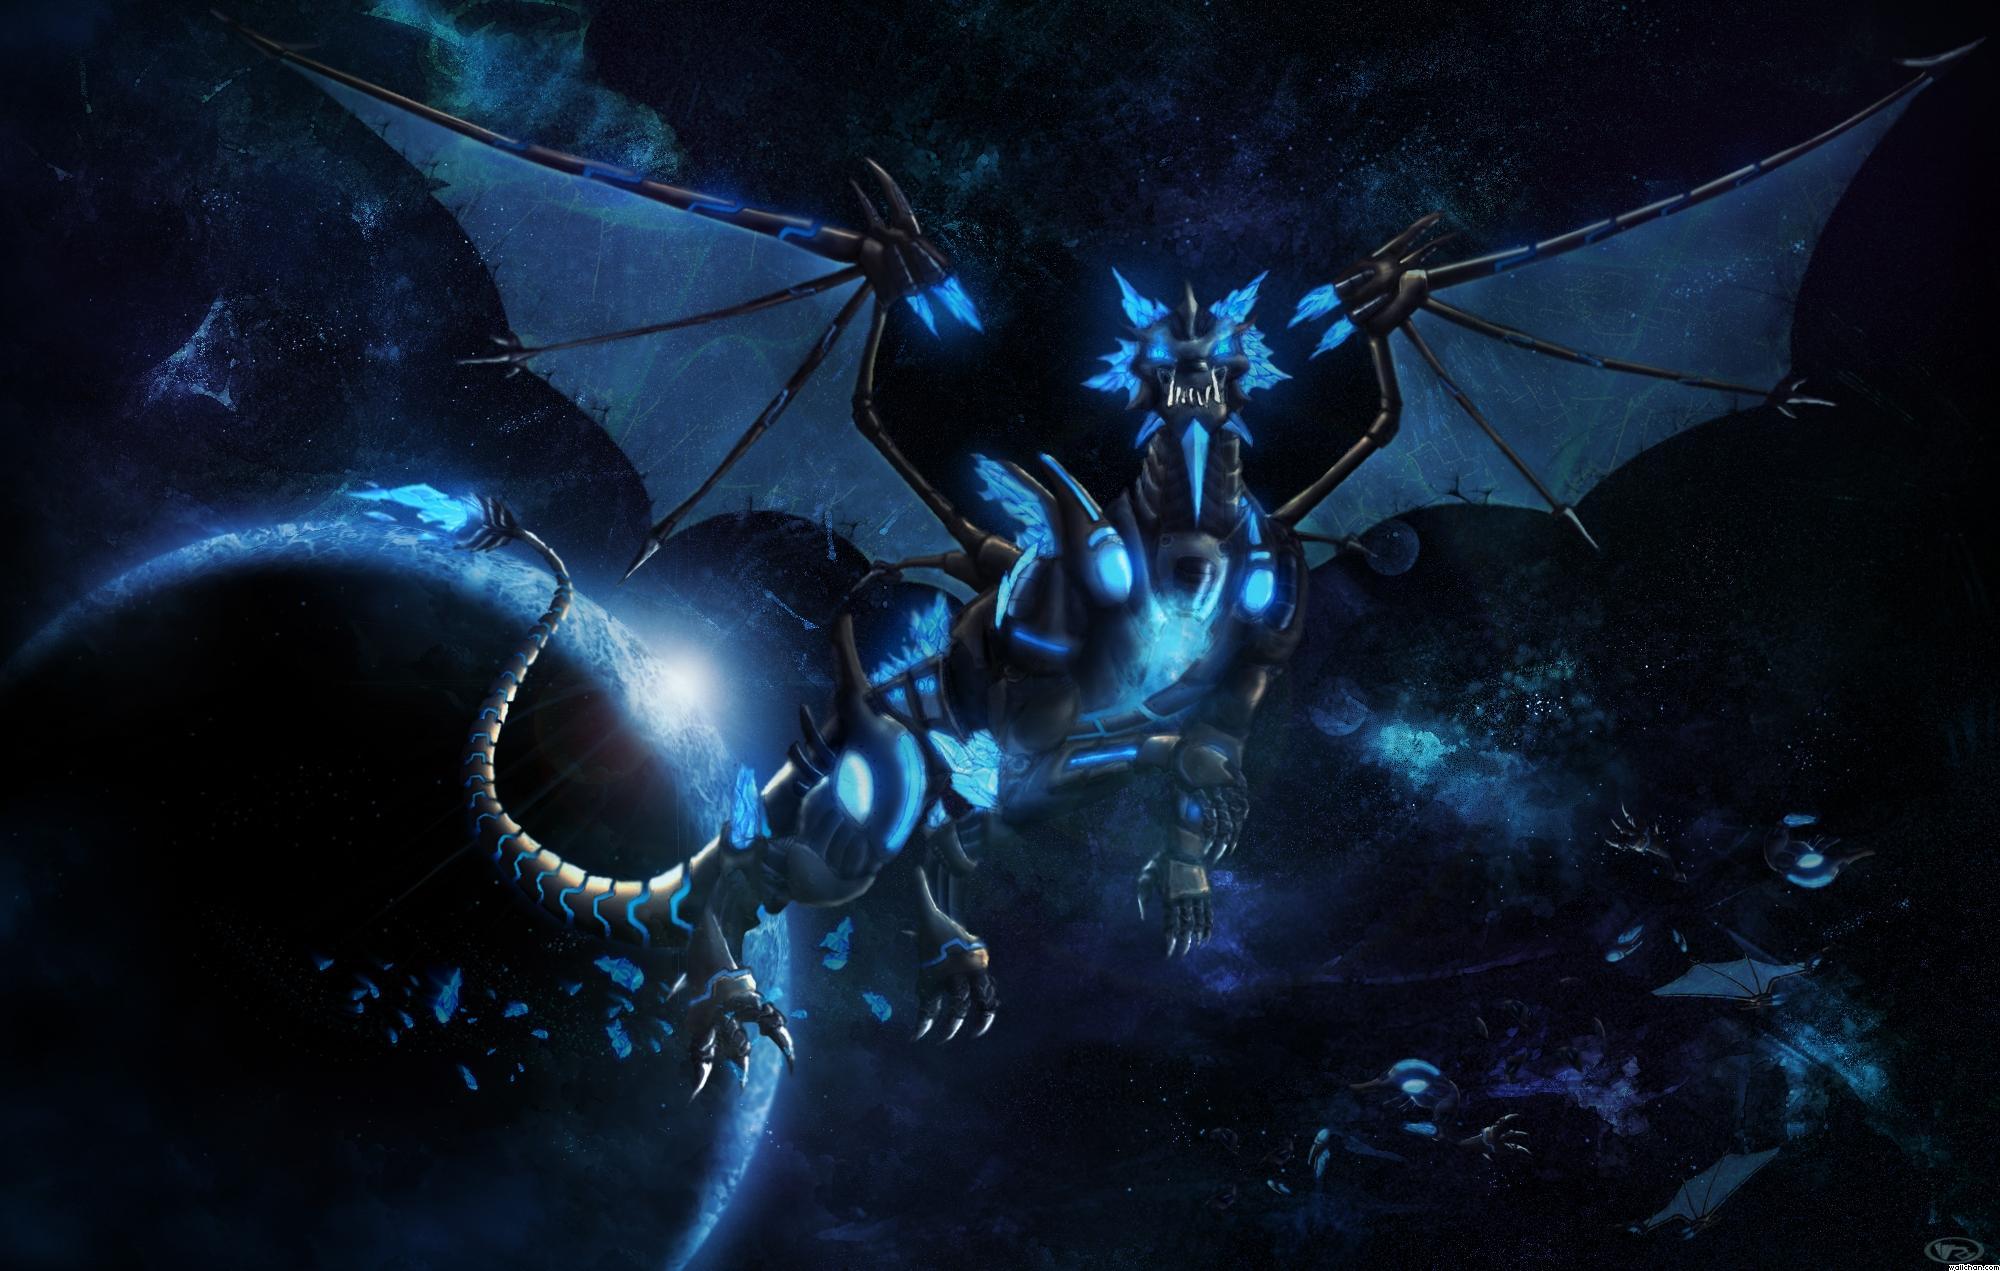 Cool Blue Dragon Wallpapers Top Free Cool Blue Dragon Backgrounds Wallpaperaccess